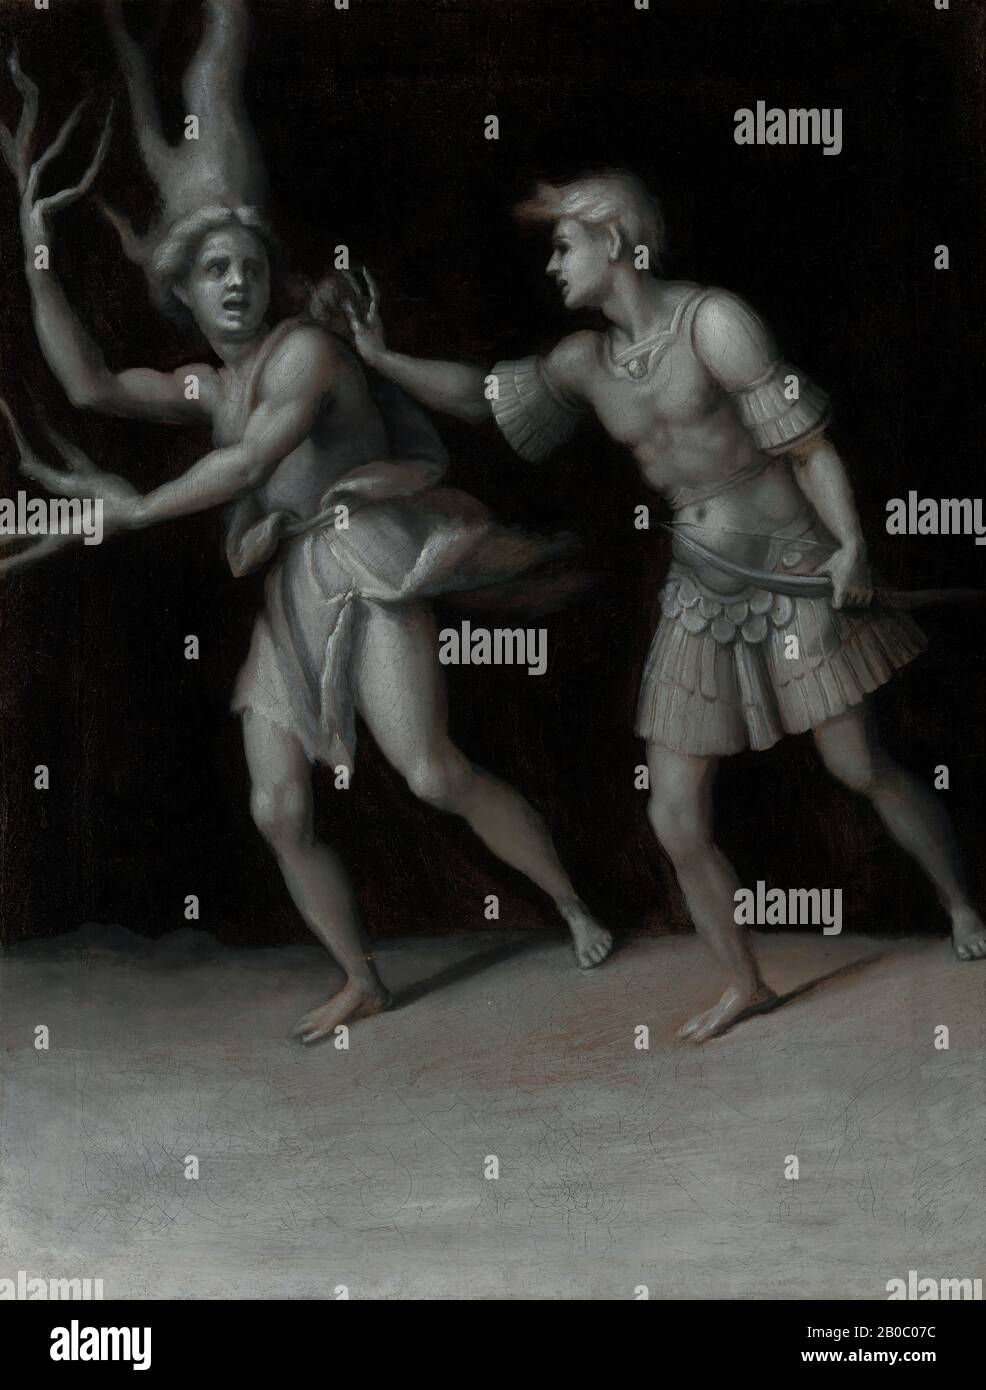 Jacopo da Carrucci (called Pontormo), Apollo and Daphne, 1513, oil on canvas, 24 3/8 in. x 19 1/4 in. (61.91 cm. x 48.9 cm.), Pontormo's haunting rendition of the tragic legend of Apollo and Daphne takes place in neither bucolic Arcadia nor Thessaly, but a shadowy nowhere land. The canvas depicts the love-struck Apollo chasing Daphne, who was shot with a blunt leaden shaft, inciting antipathy. Growing exhausted from his relentless pursuit, Daphne implores her river god father to save her. The chaste maiden's prayers are answered. Just as Apollo is about to overtake her, she is transformed into Stock Photo